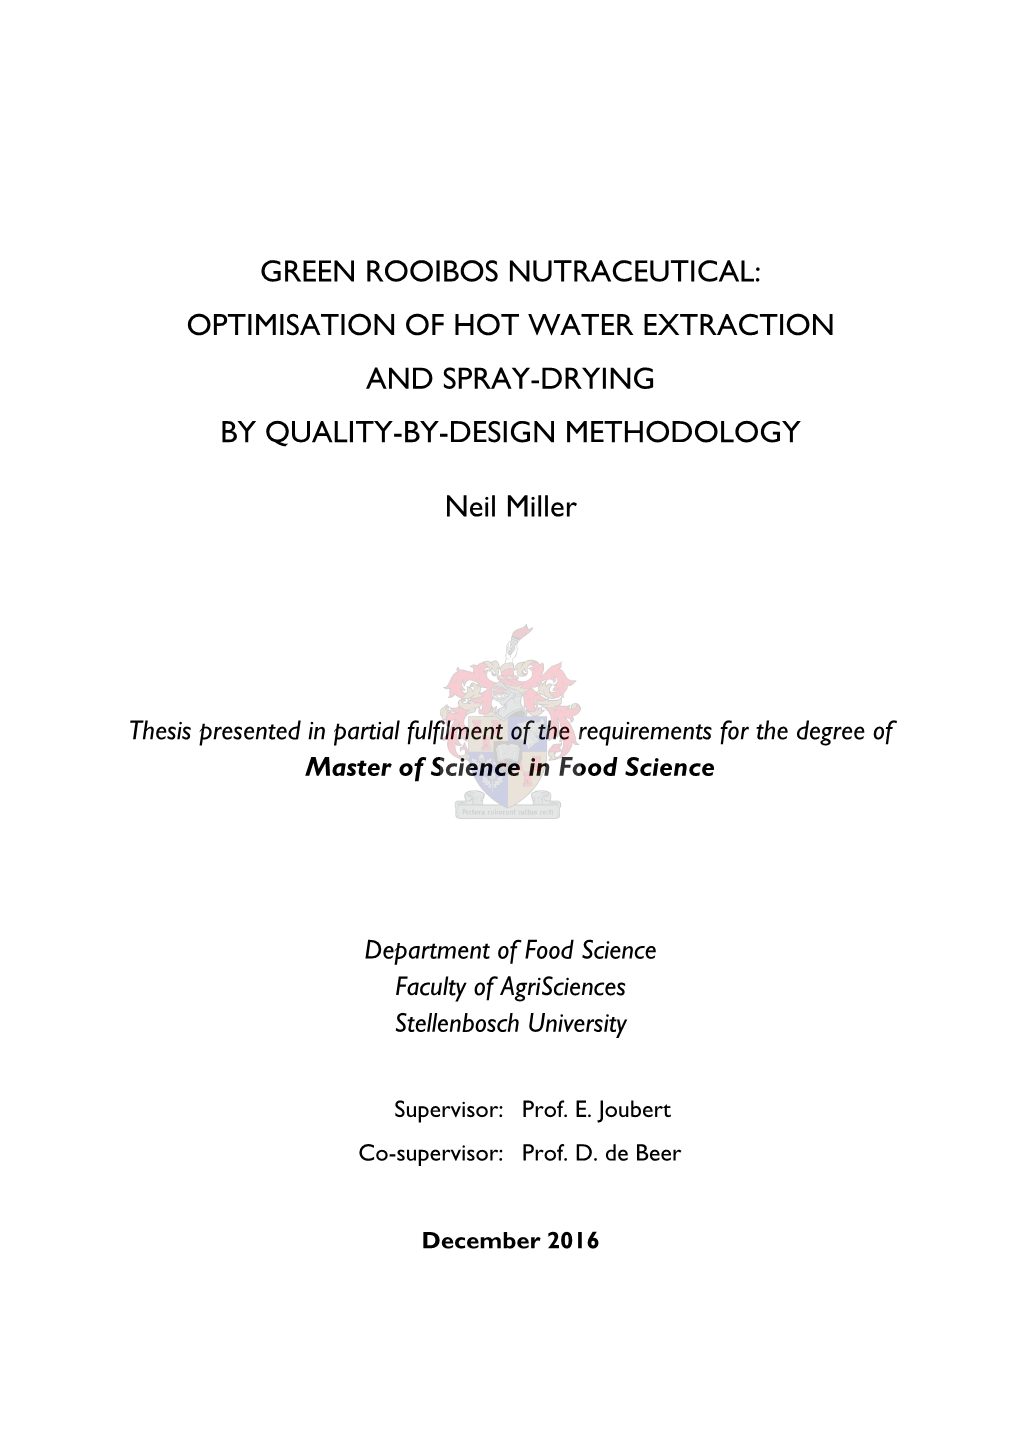 Green Rooibos Nutraceutical: Optimisation of Hot Water Extraction and Spray-Drying by Quality-By-Design Methodology